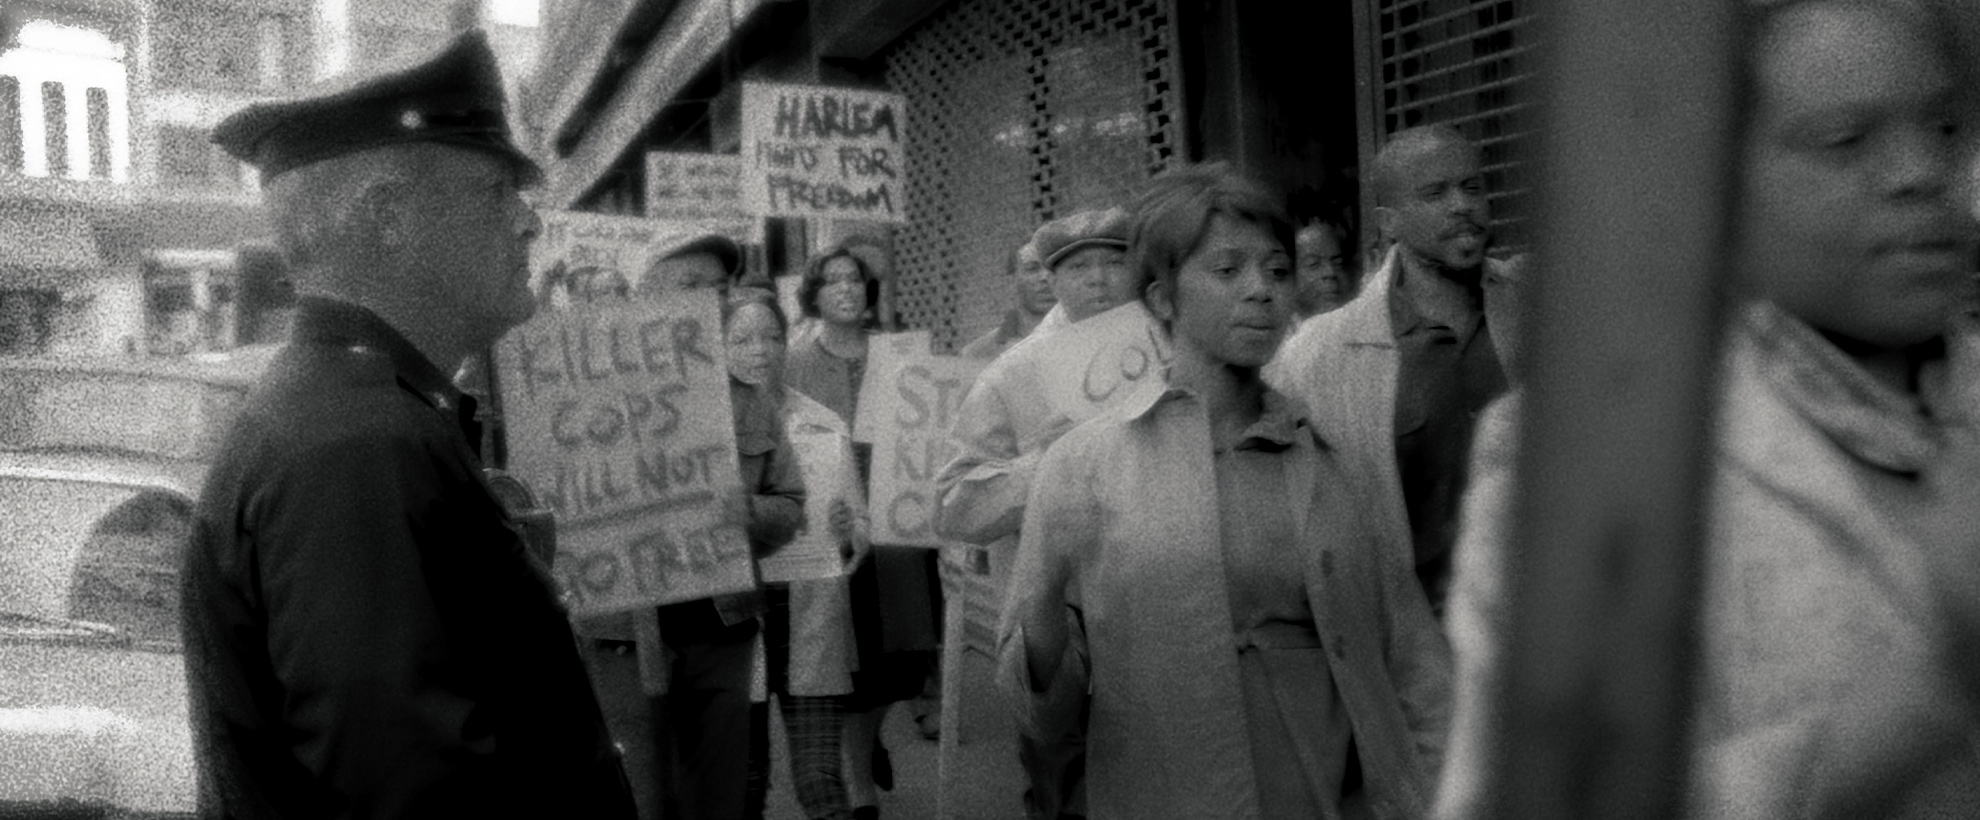 Grainy black and white footage of women protesting